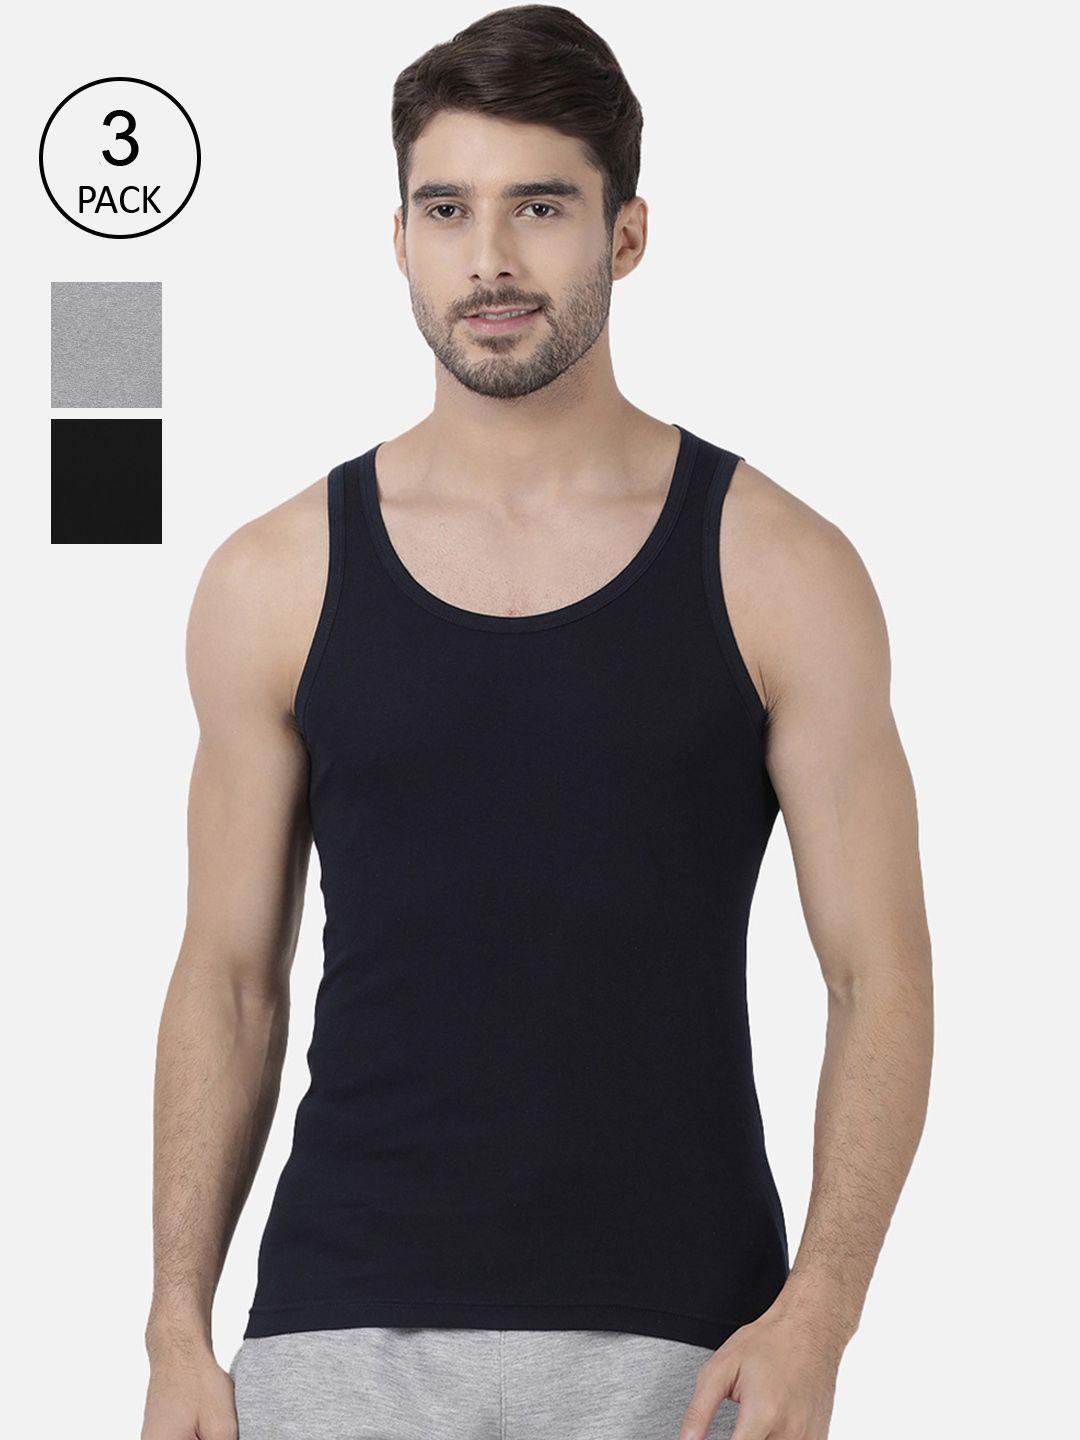 one8-by-virat-kohli-men-pack-of-3-solid-pure-super-combed-cotton-basic-innerwear-vests